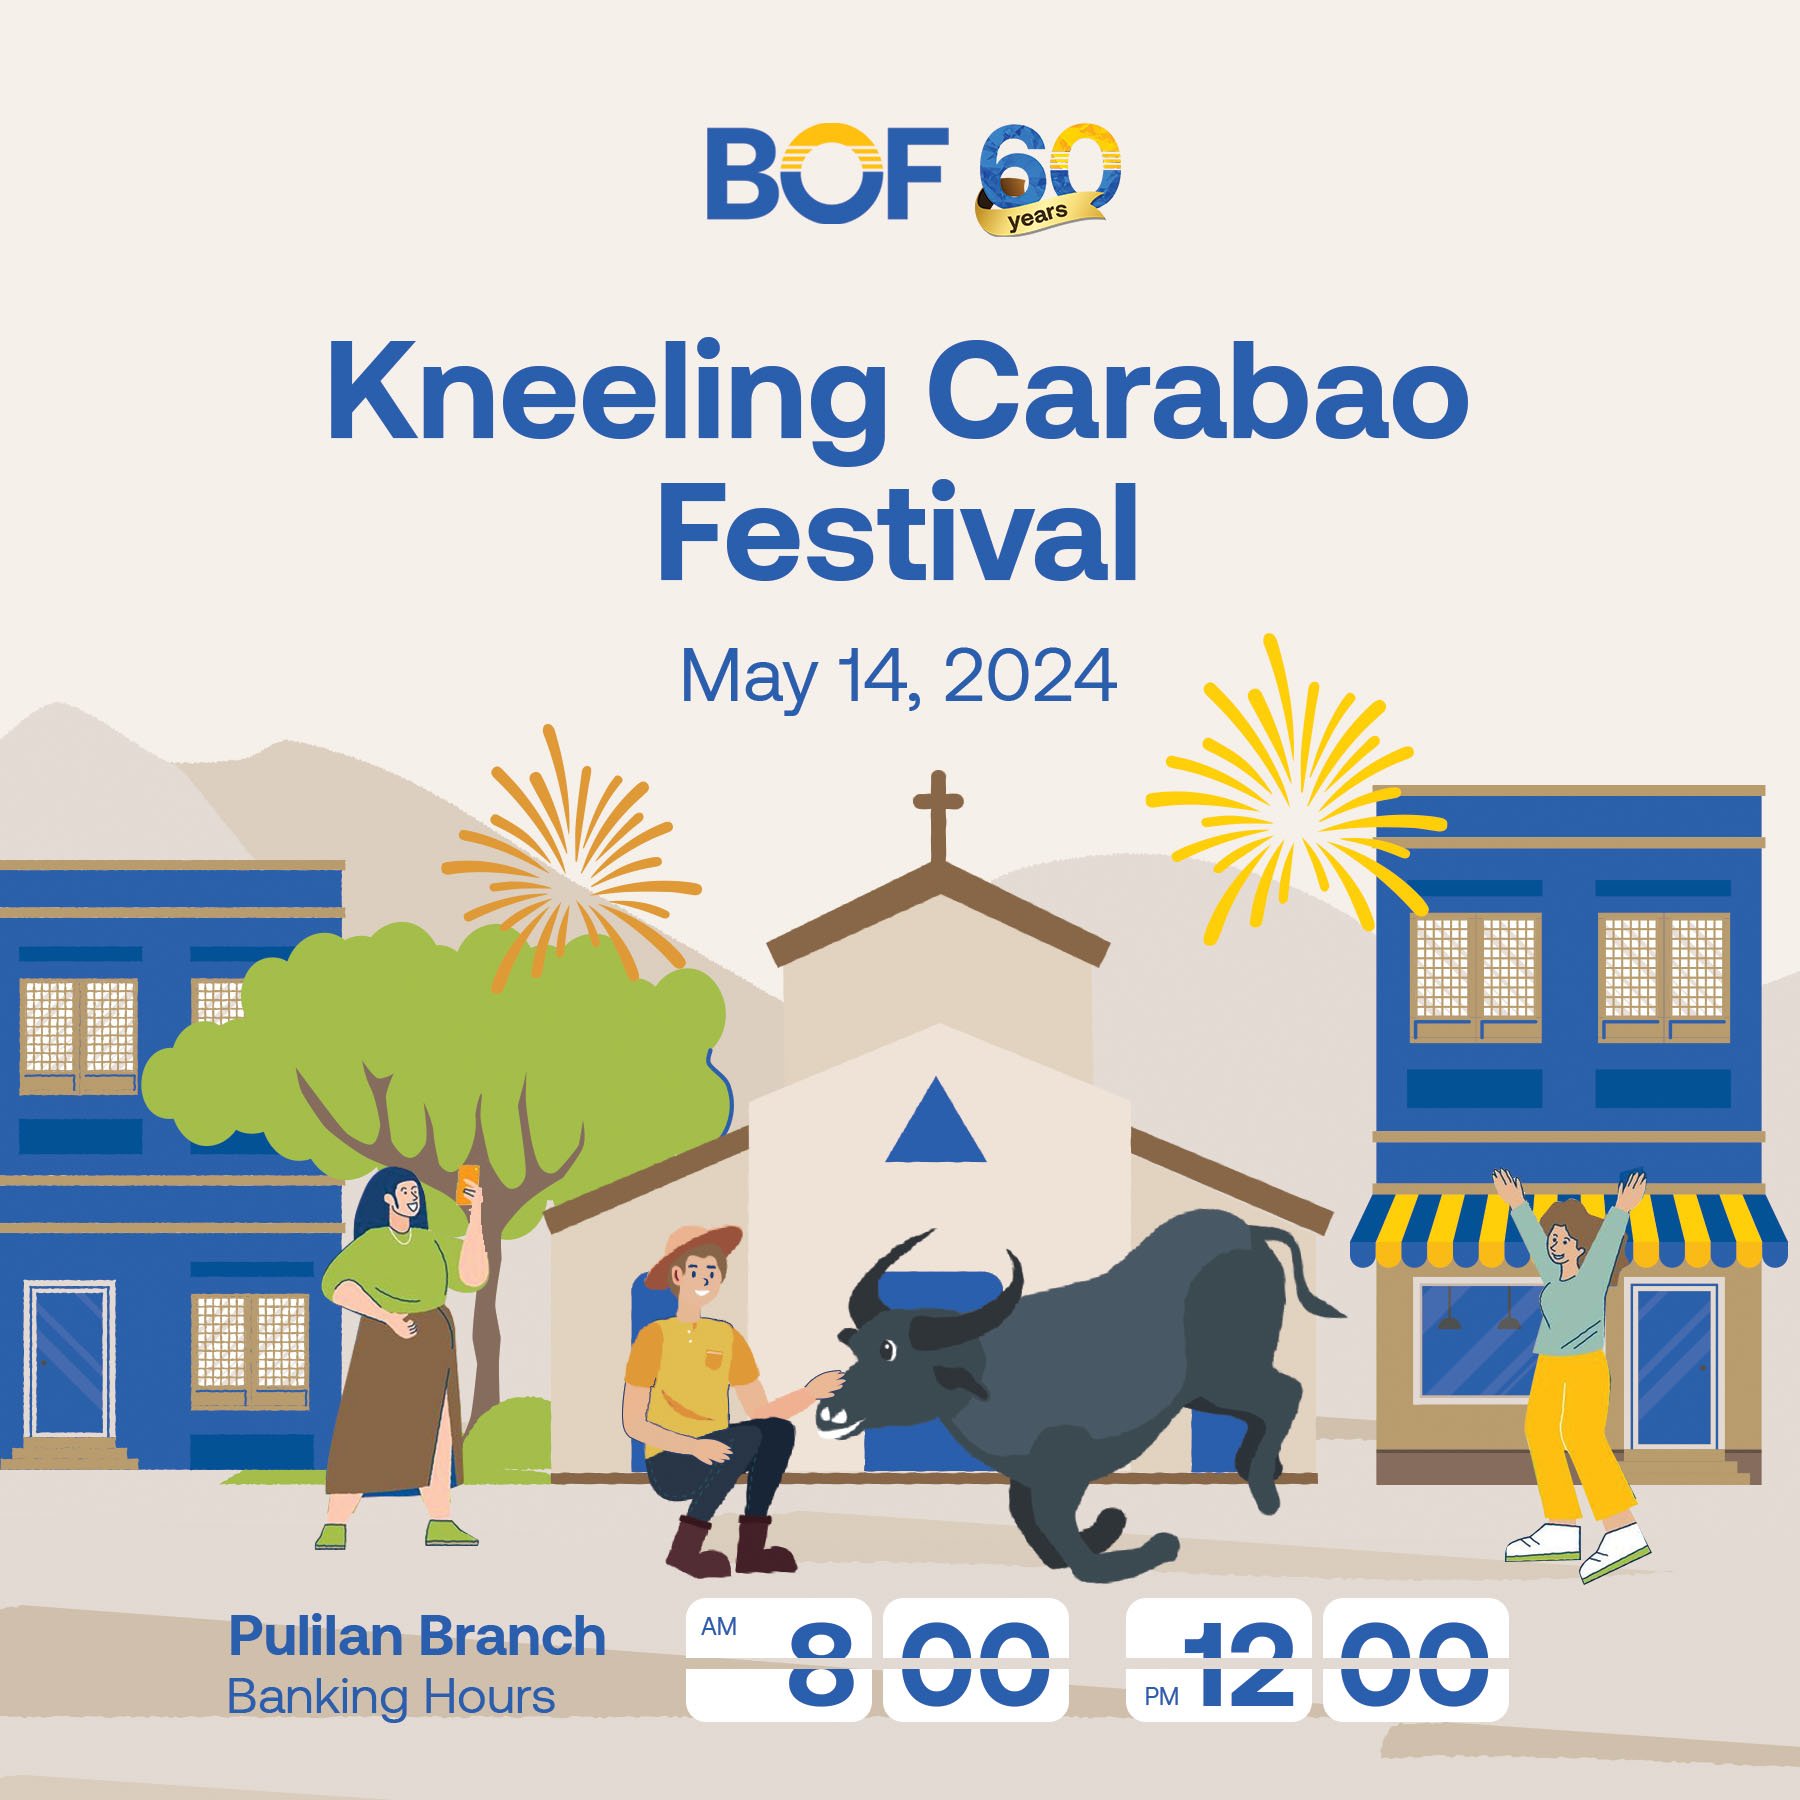 #BankAdvisory

Please be informed that Pulilan branch will be open from 8:00 am to 12:00 nn tomorrow, May 14, 2024 (Tuesday) in observance of the Kneeling Carabao Festival.

Regular banking operations will resume on May 15, 2024 (Wednesday). Please p